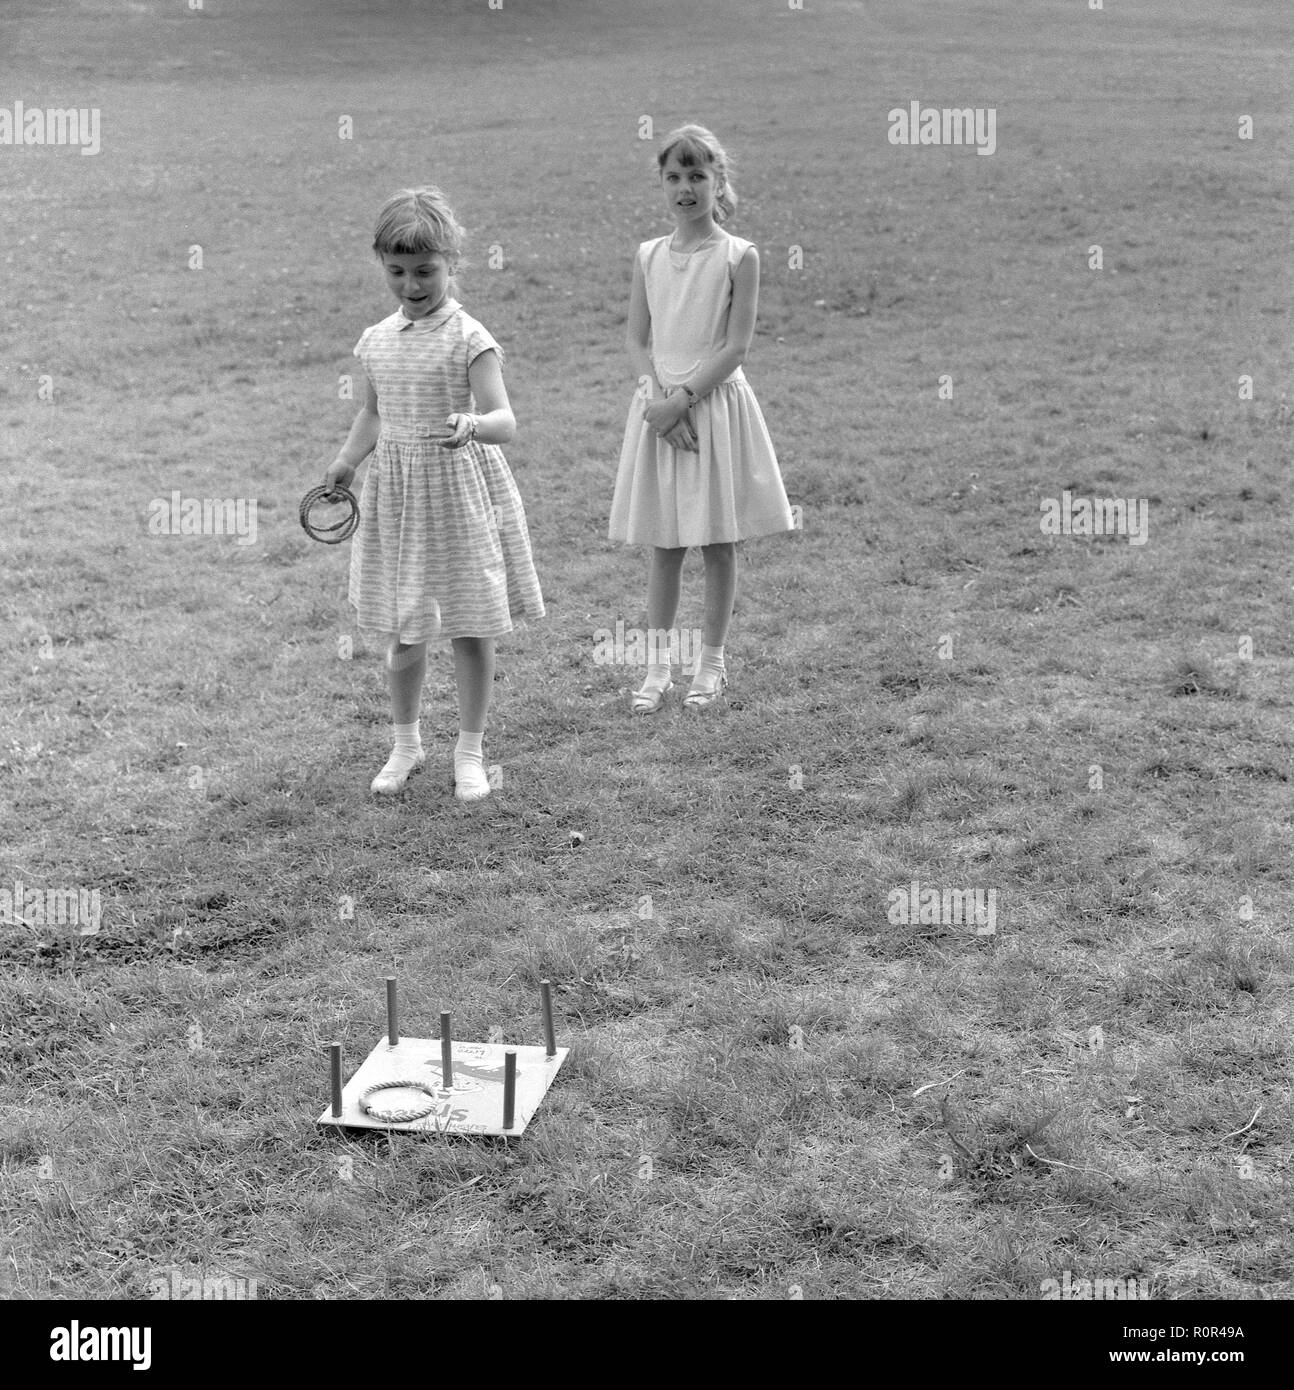 Summer activitiy in the 1950s. Two girls are playing a game of throwing rings. Hitting the middle ring gets the most points.  Sweden 1957 Ref 3480 Stock Photo